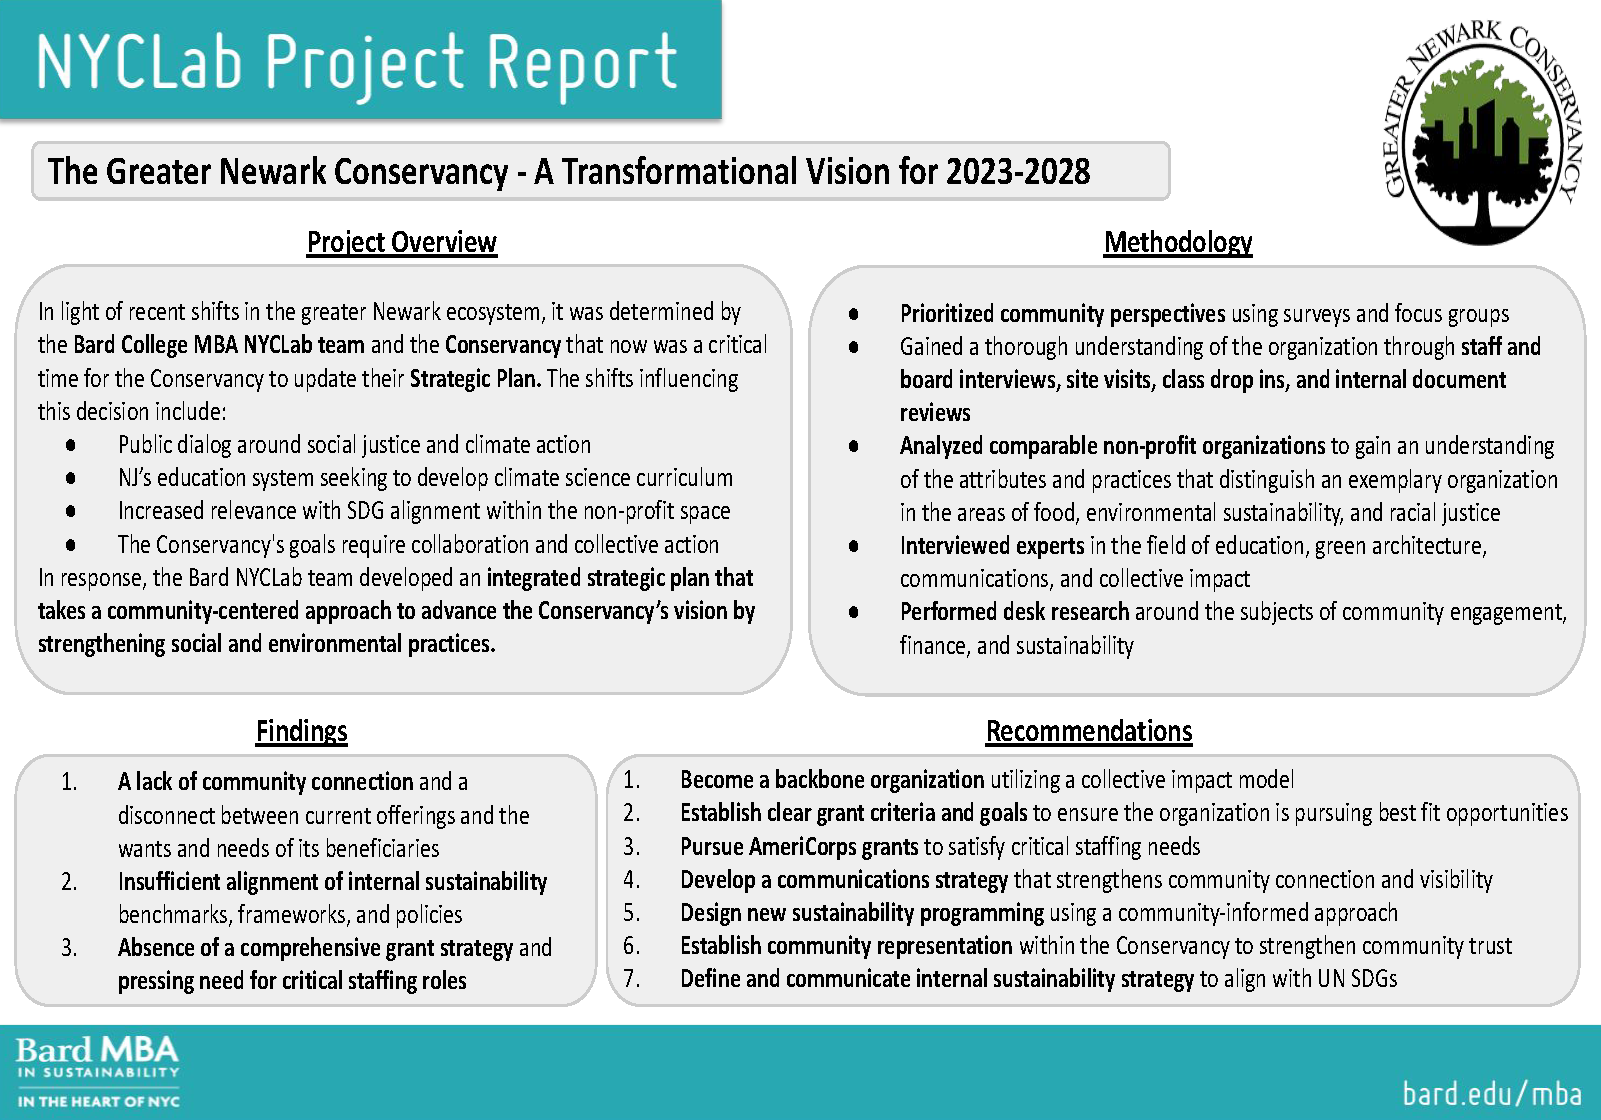 The Greater Newark Conservancy One-Page Project Report